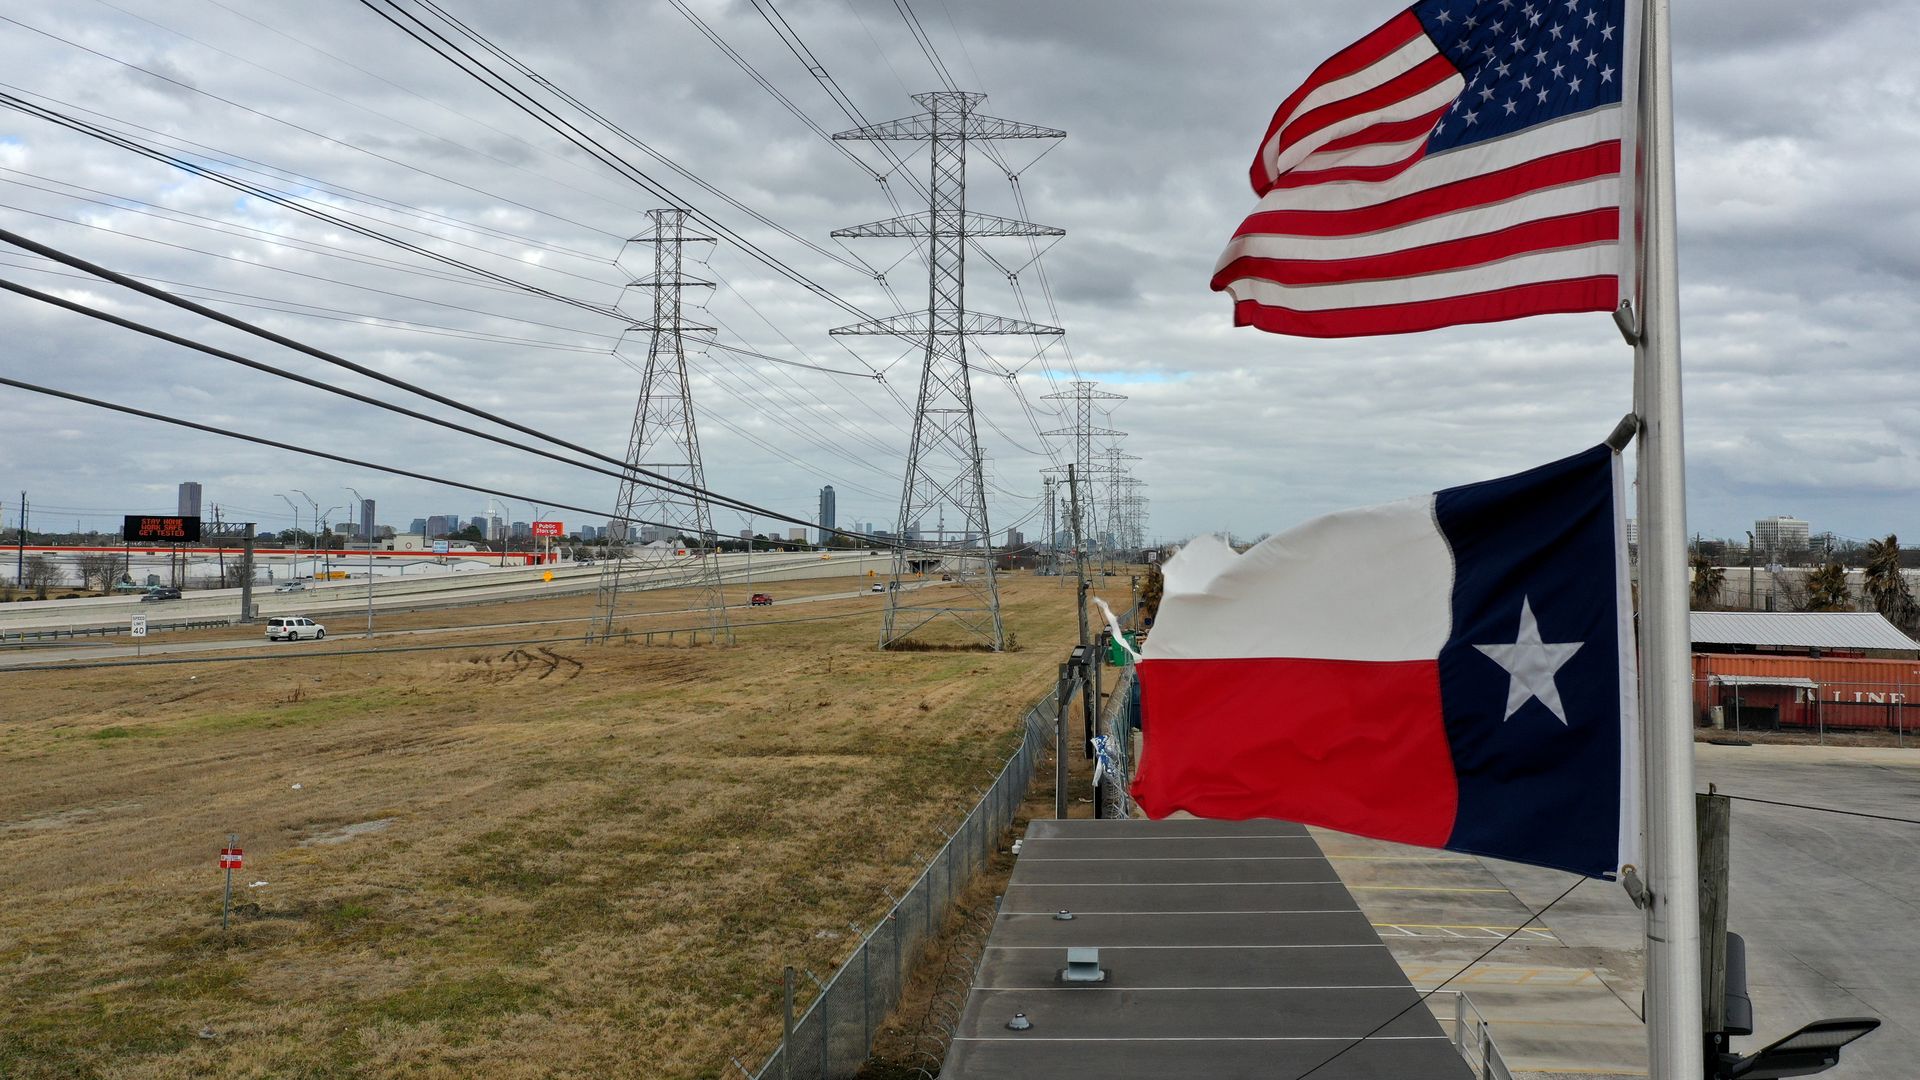 The U.S. and Texas flags fly in front of high voltage transmission towers on February 21, 2021 in Houston, Texas. 